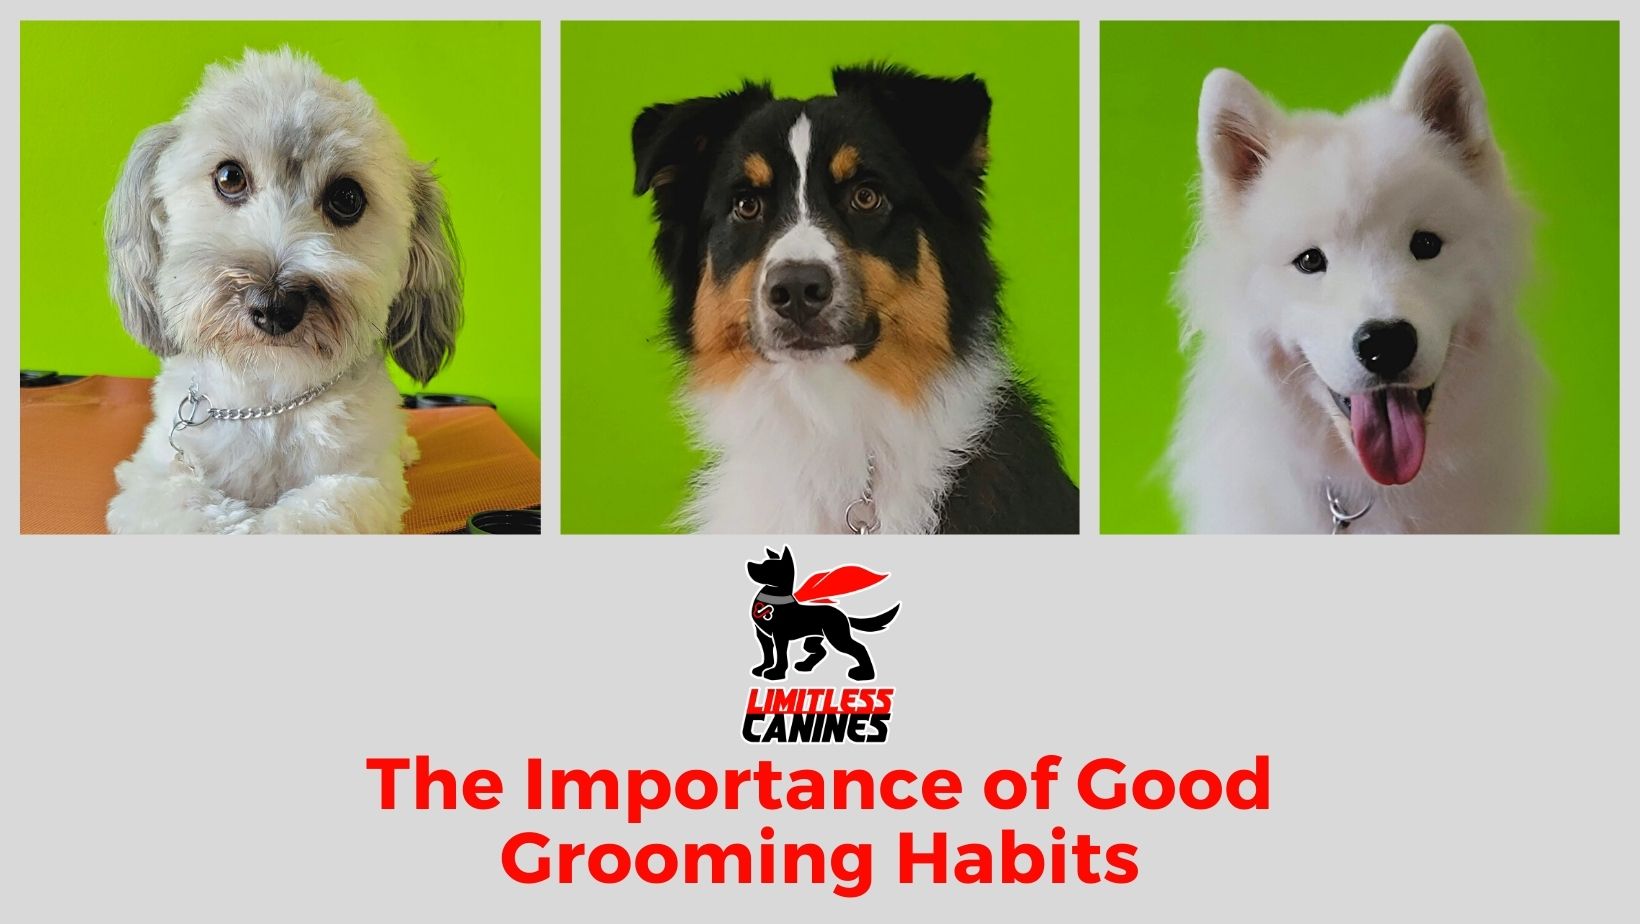 Limitless canines grooming habits